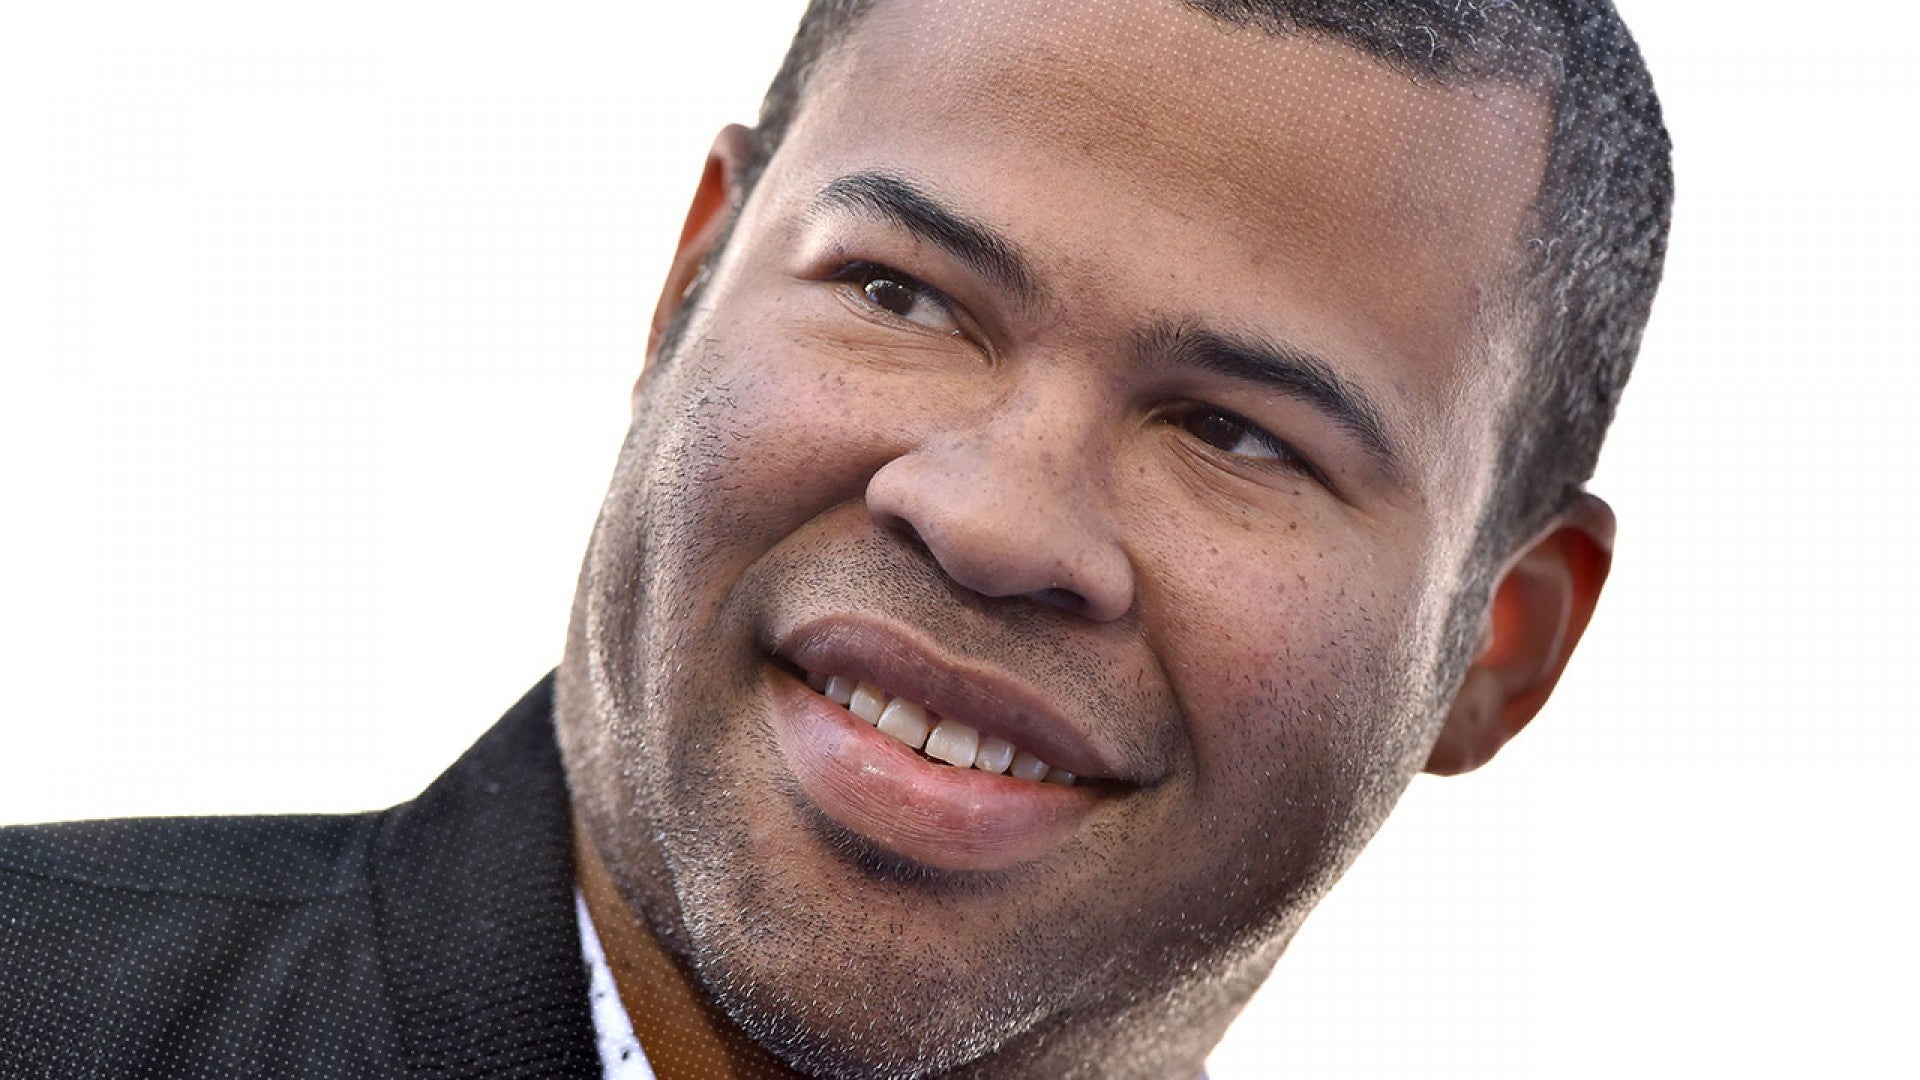 EXCLUSIVE: Peele Unmasks America's 'Post-Racial With 'Get | Entertainment Tonight